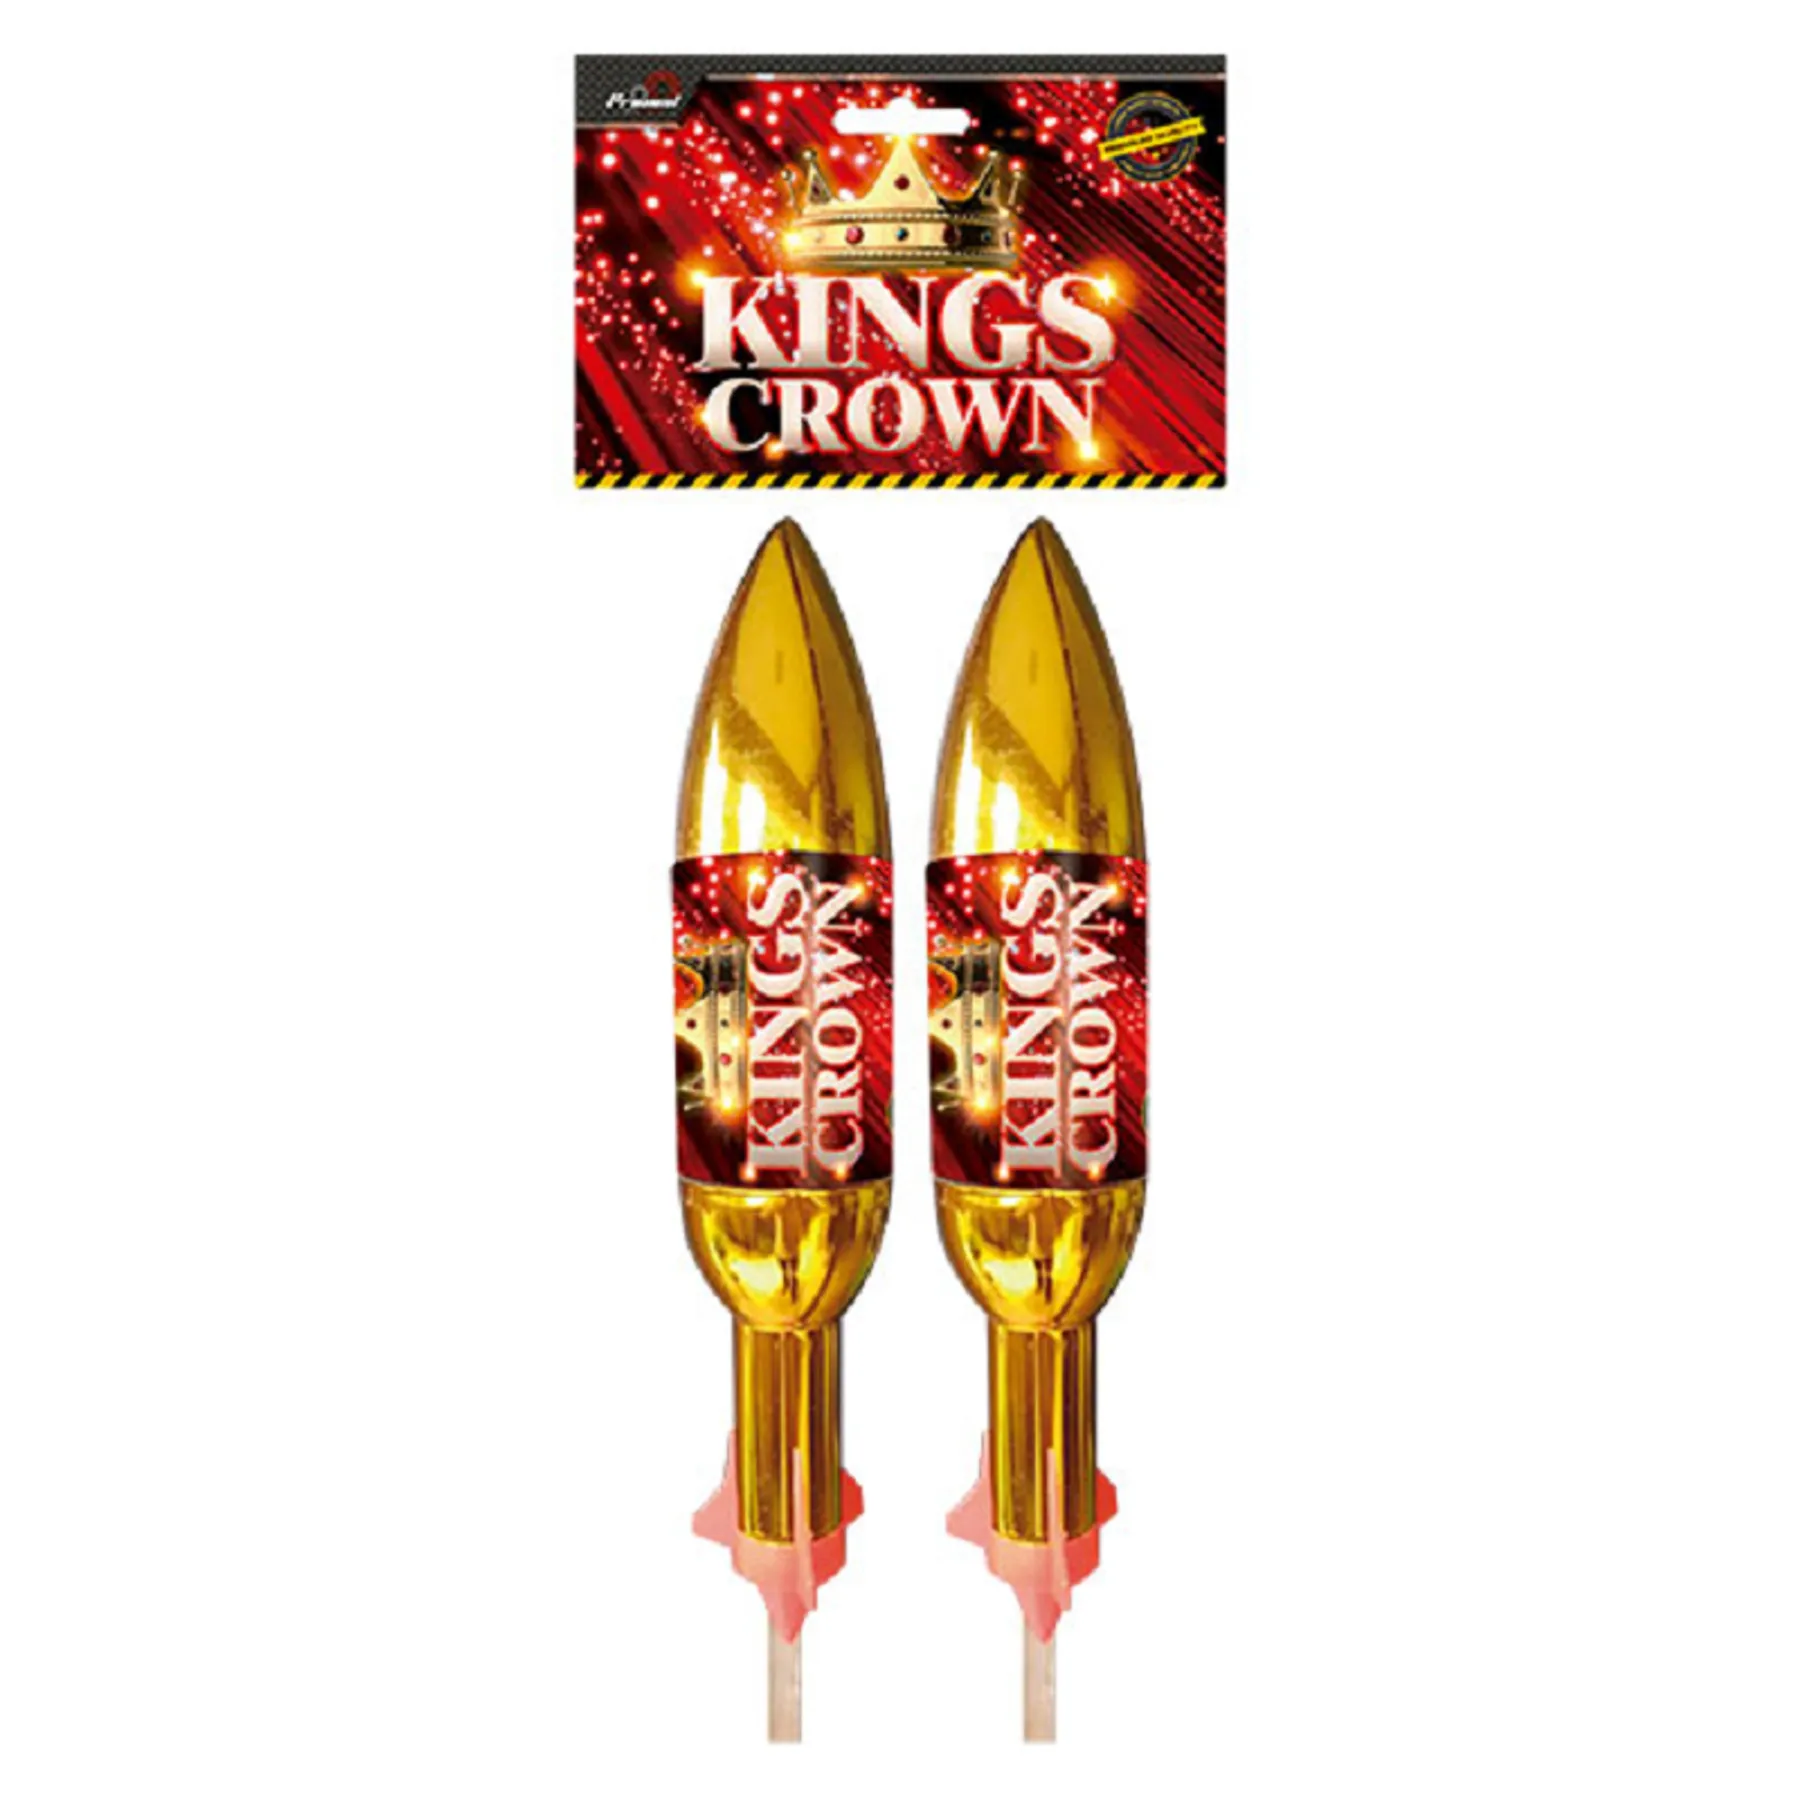 King crown rockets from primed pyrotechnics